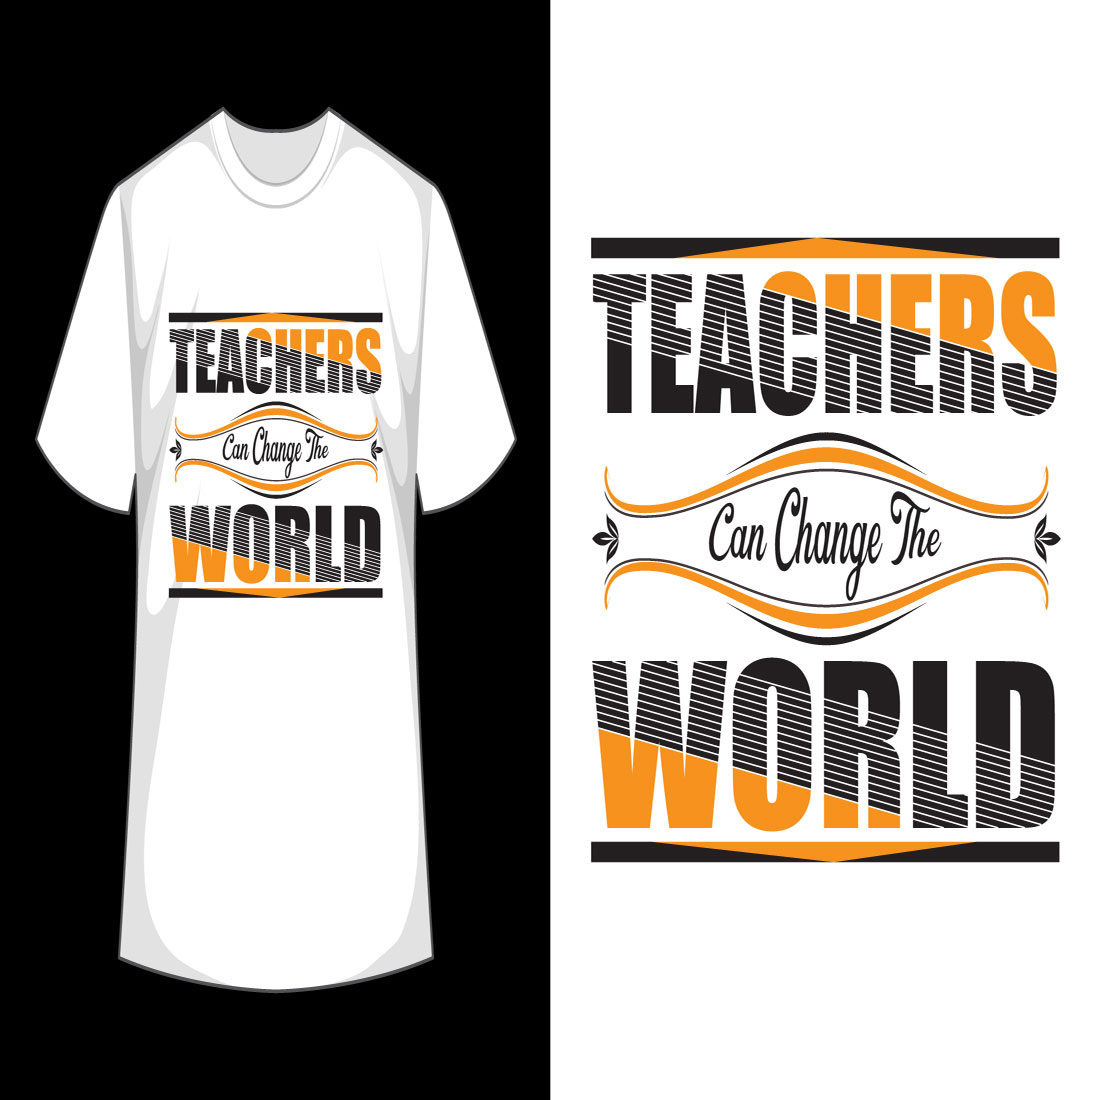 Teachers day T shirt cover image.